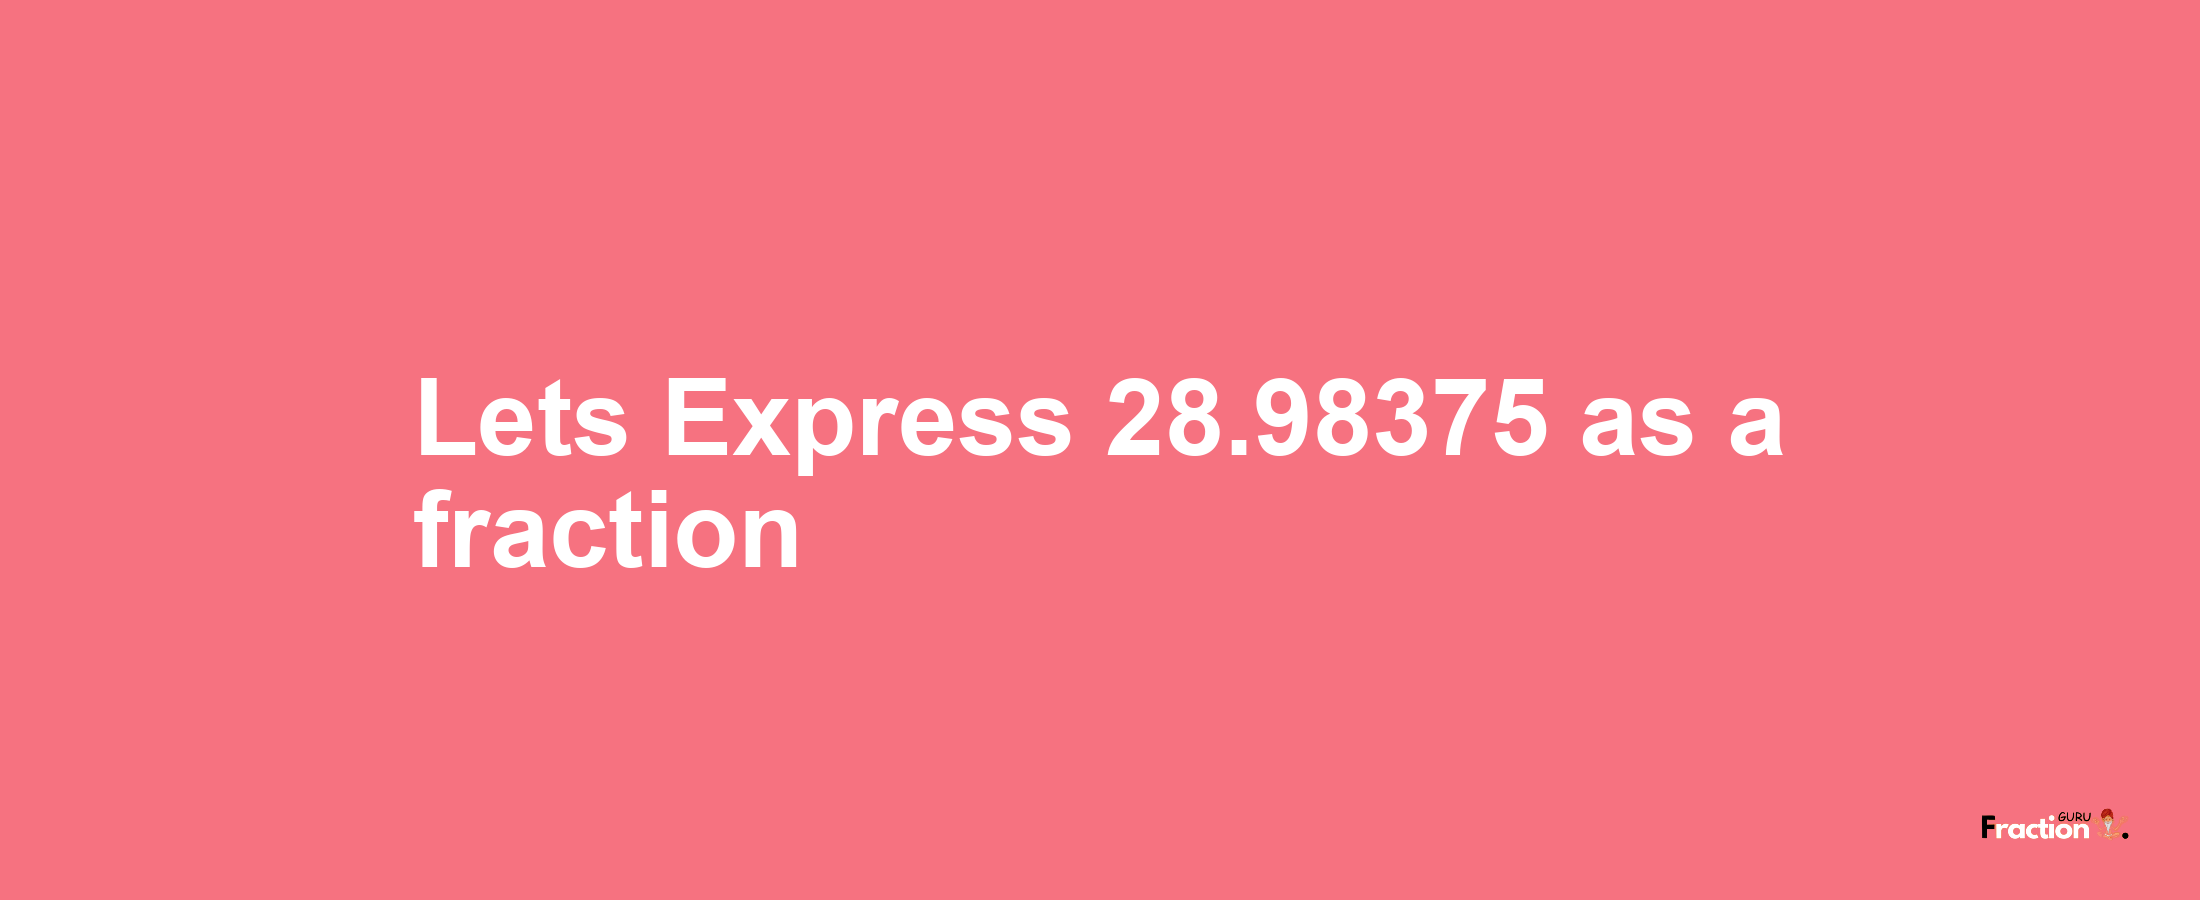 Lets Express 28.98375 as afraction